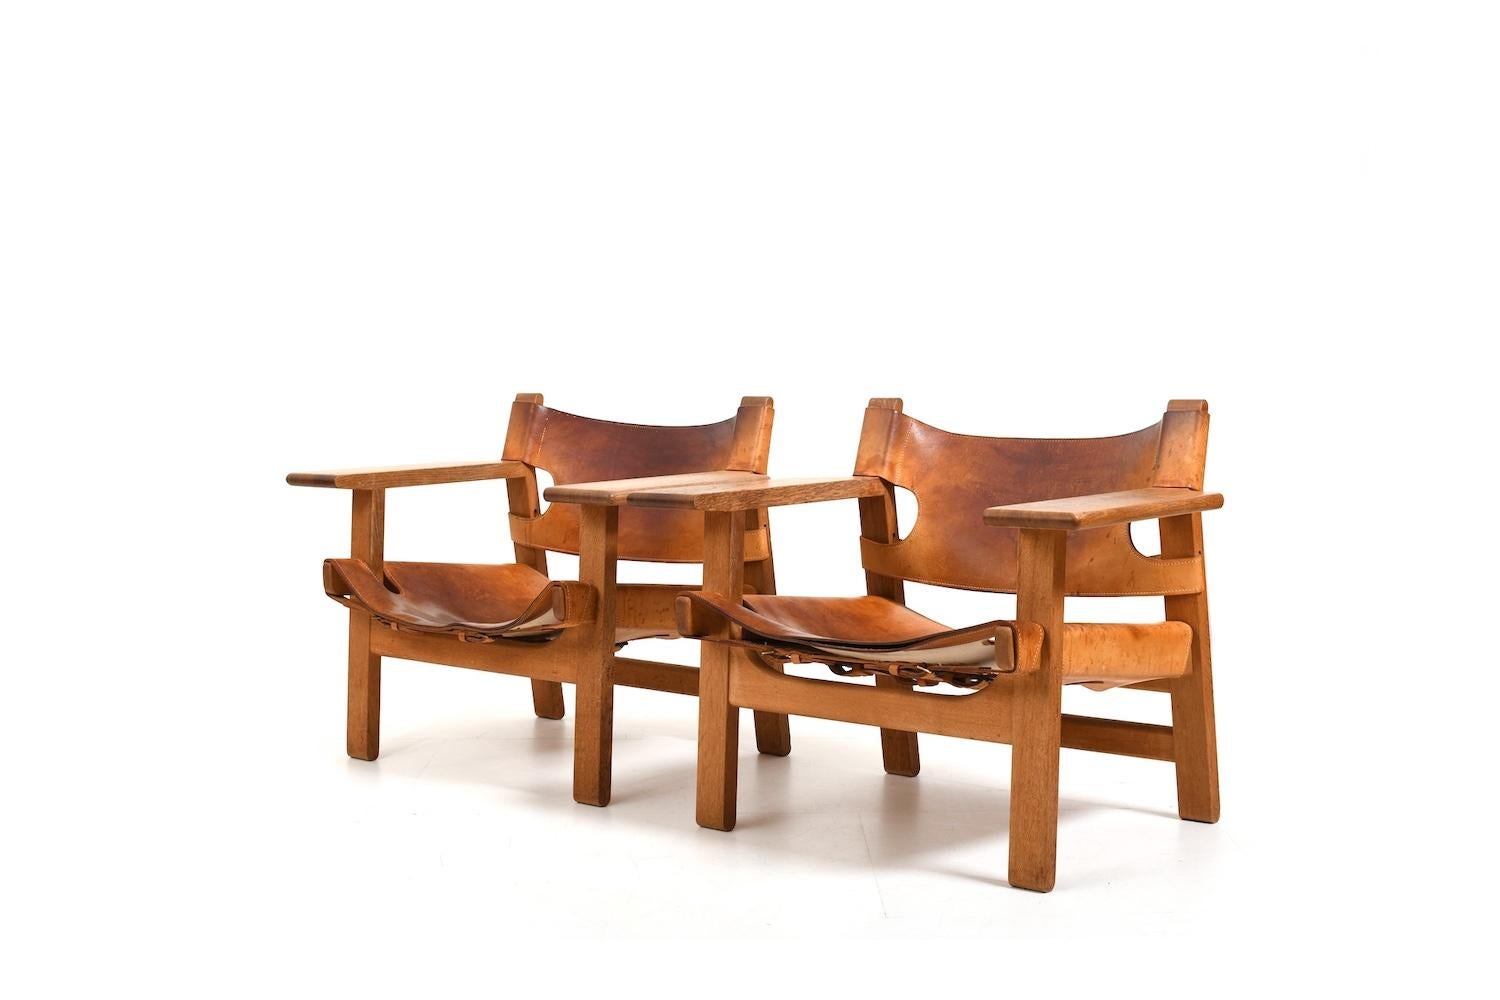 Pair of Old Spanish Chairs by Børge Mogensen early 1960s For Sale 2